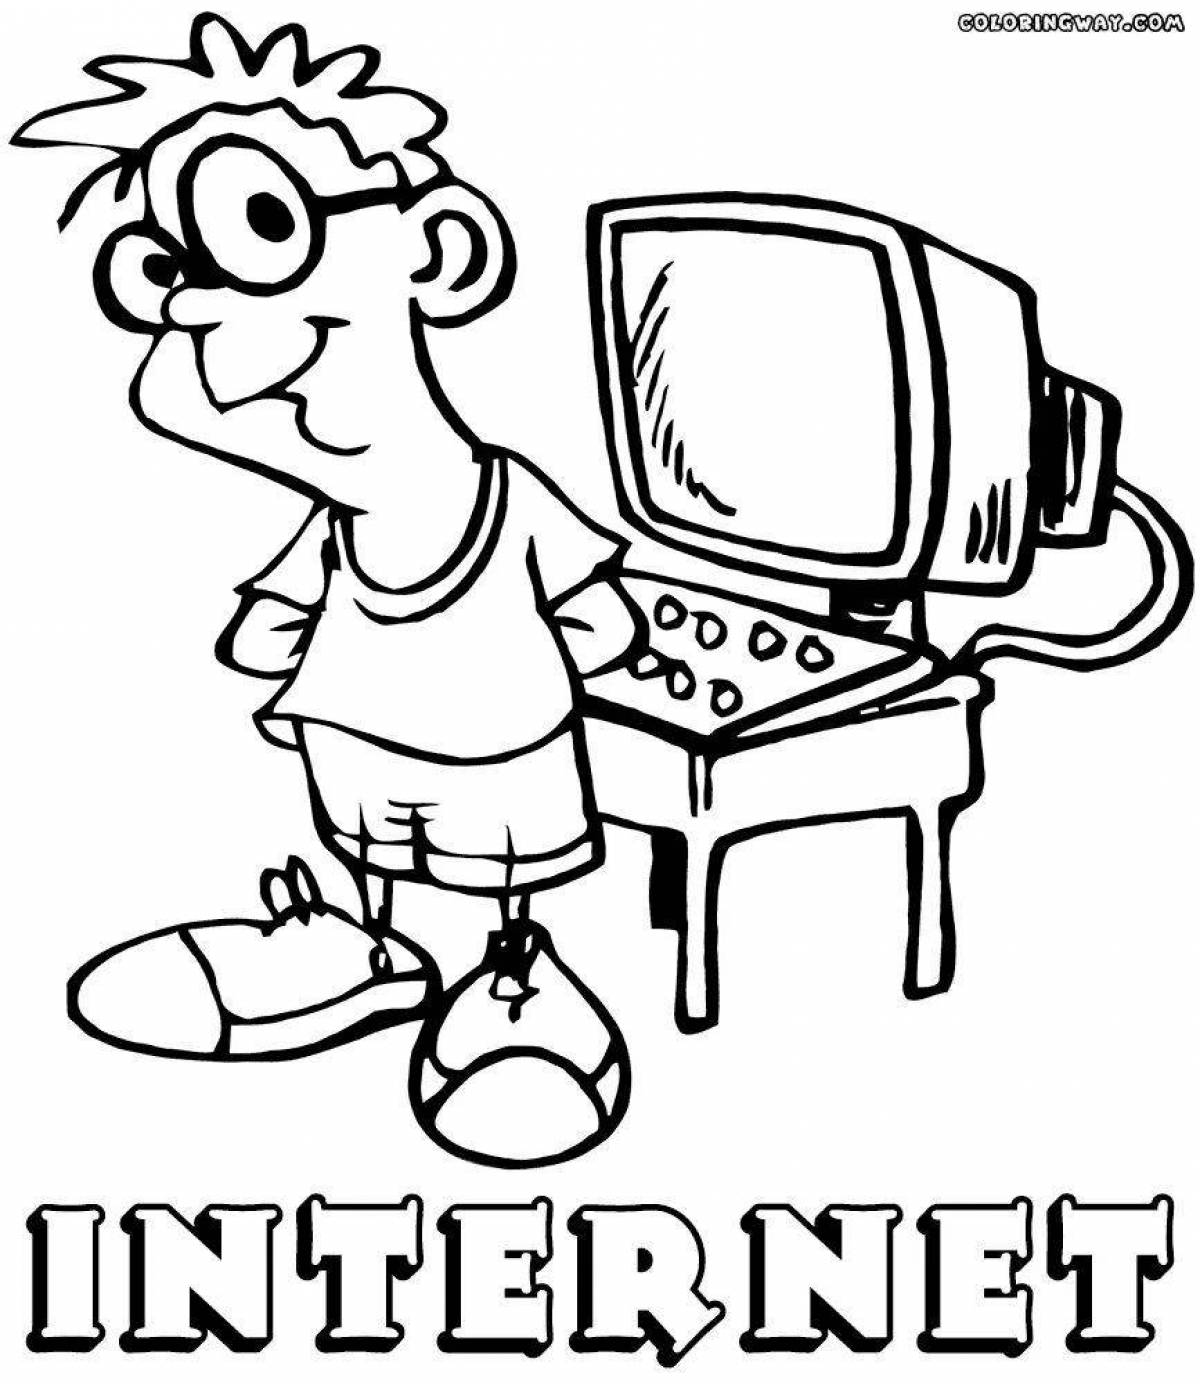 Internet security bright coloring page